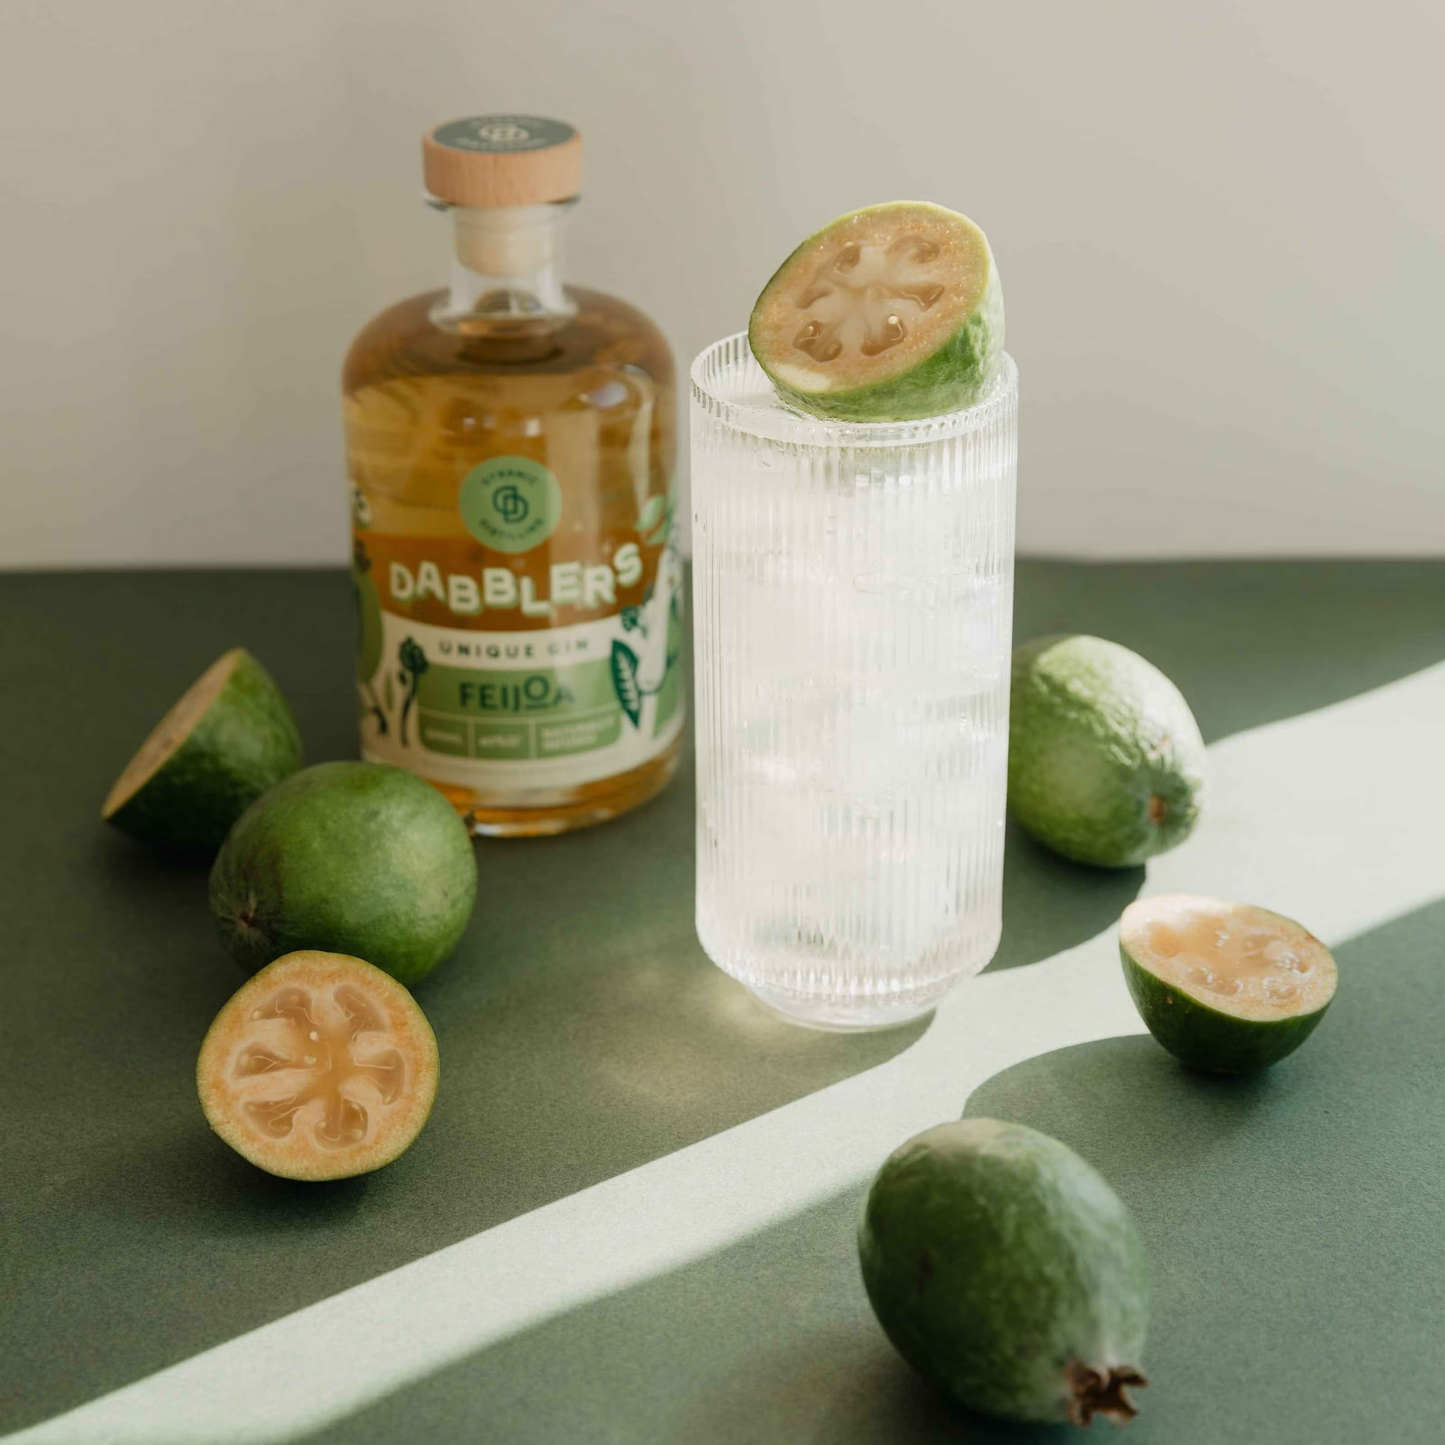 Dabblers Feijoa Gin 200ml LIMITED EDITION (New)